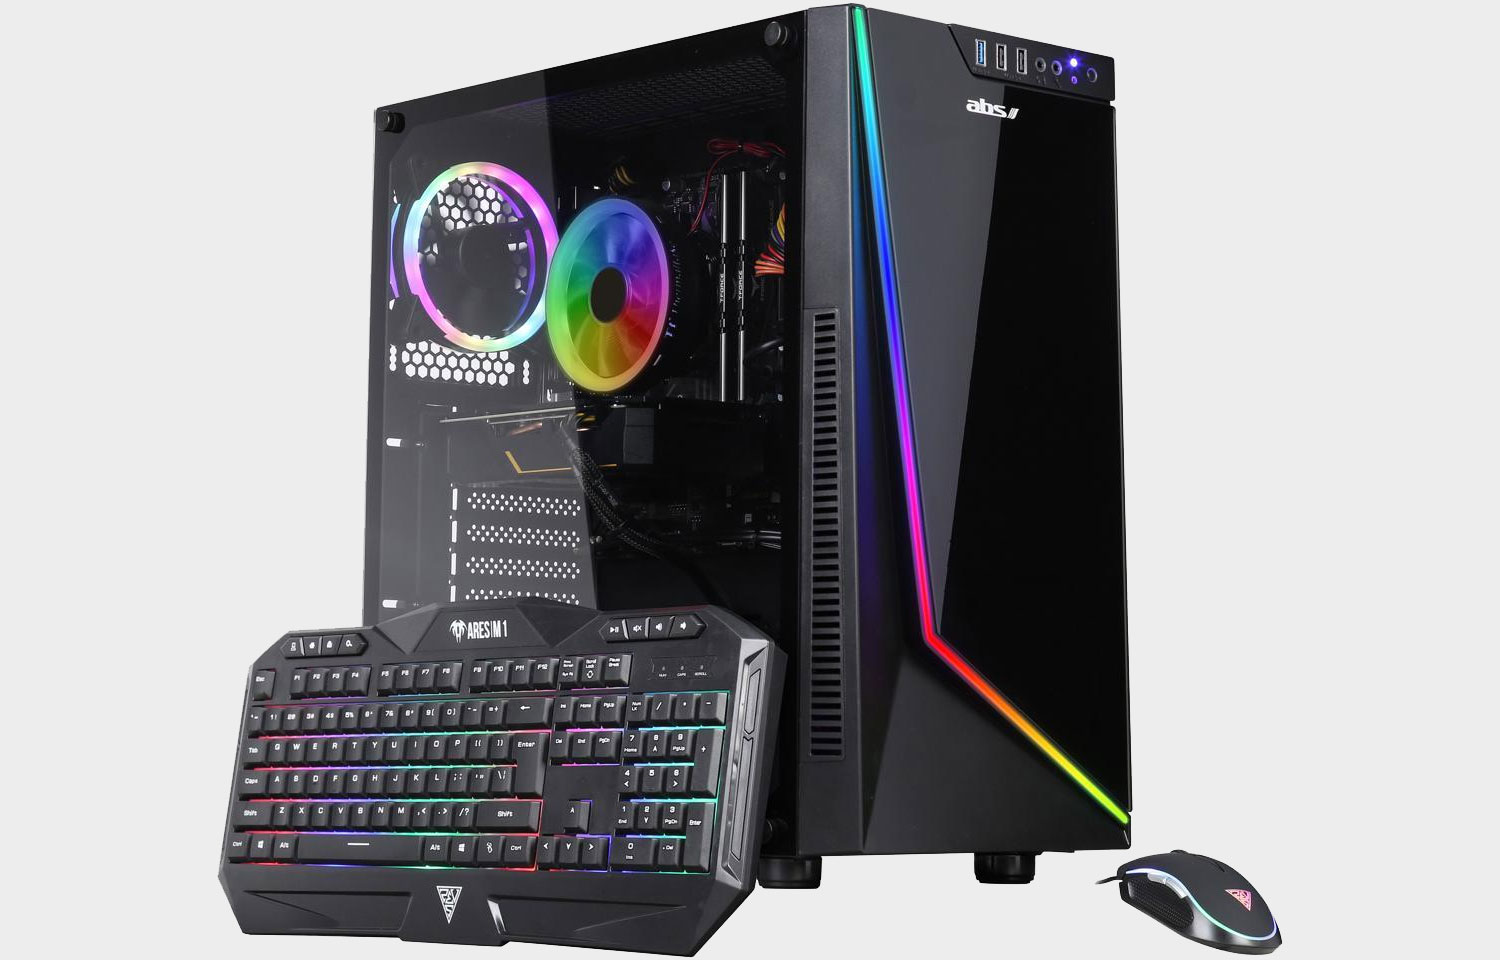 This gaming PC with a GeForce RTX 2070 Super is on sale for $1,200 